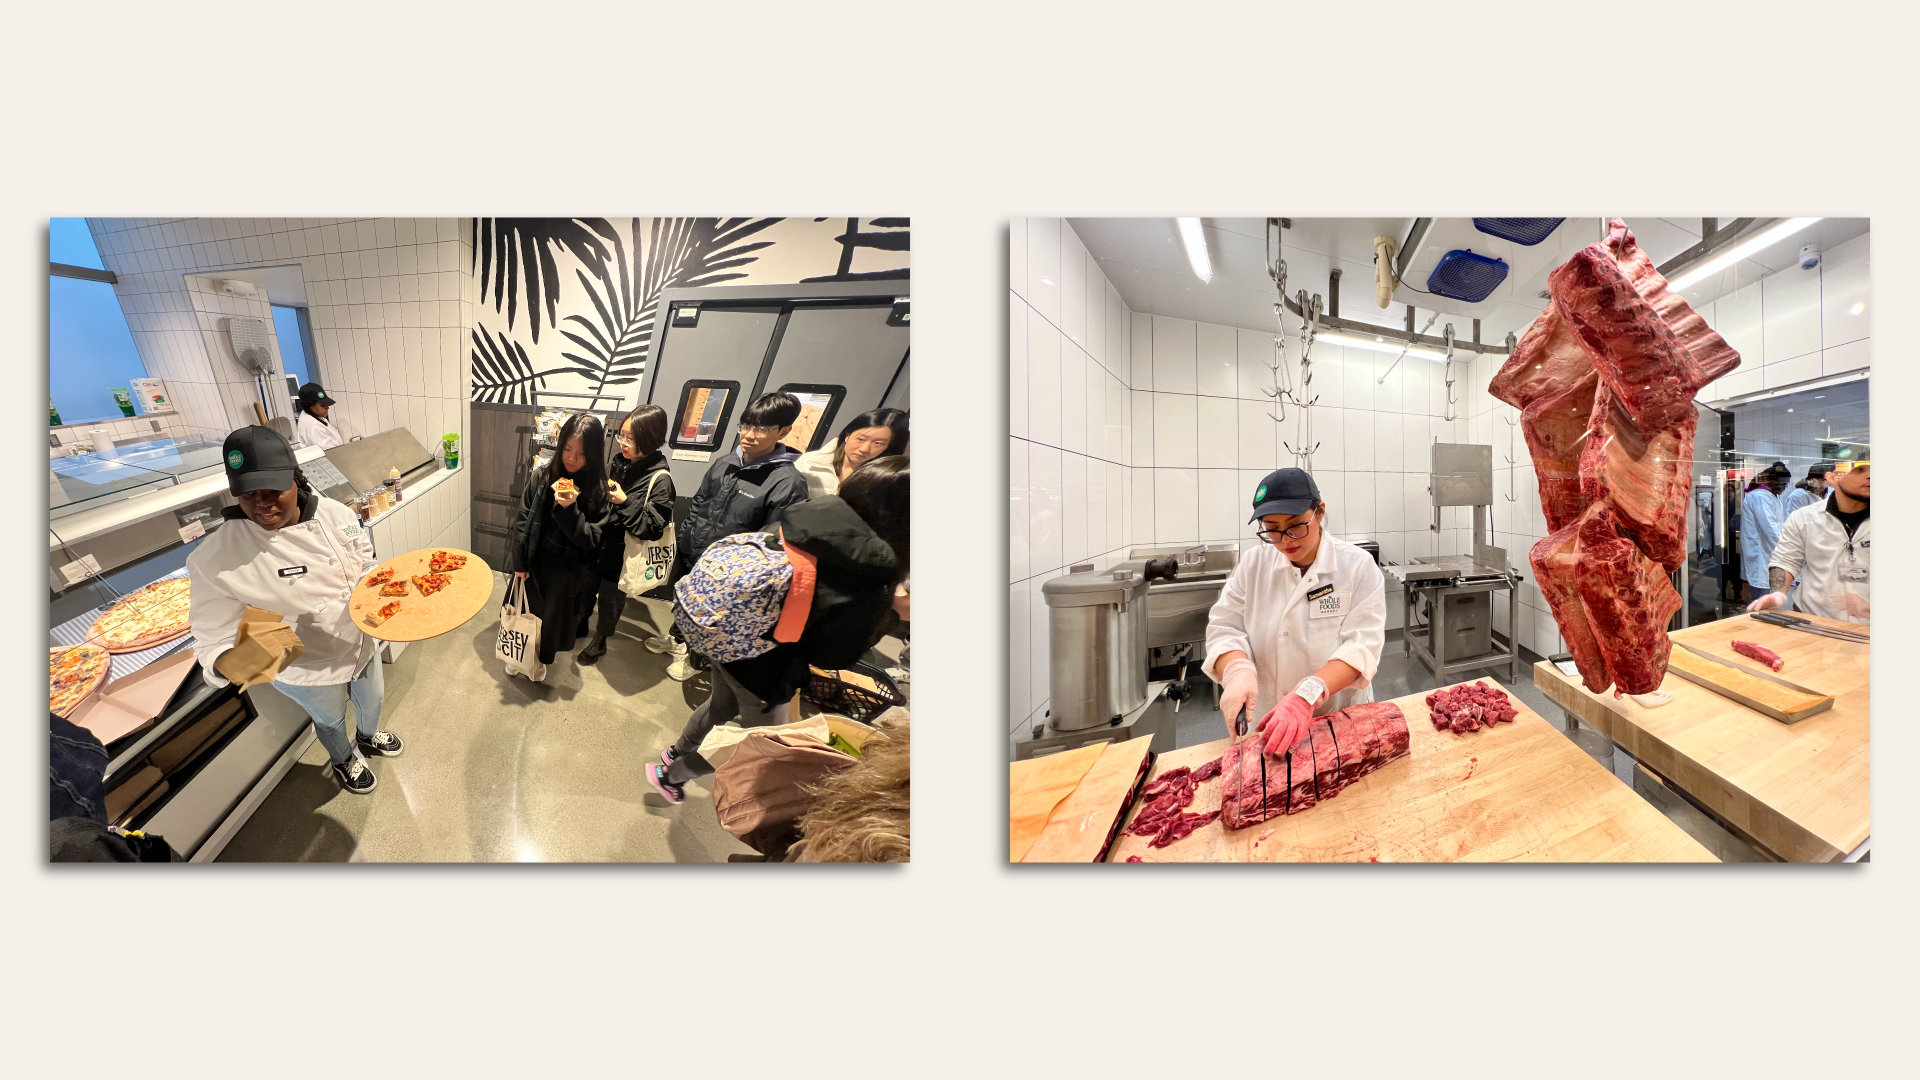 At left, a pizza maker offers slices to customers at a Whole Foods store; at right, a butcher carves meat inside a Whole Foods.